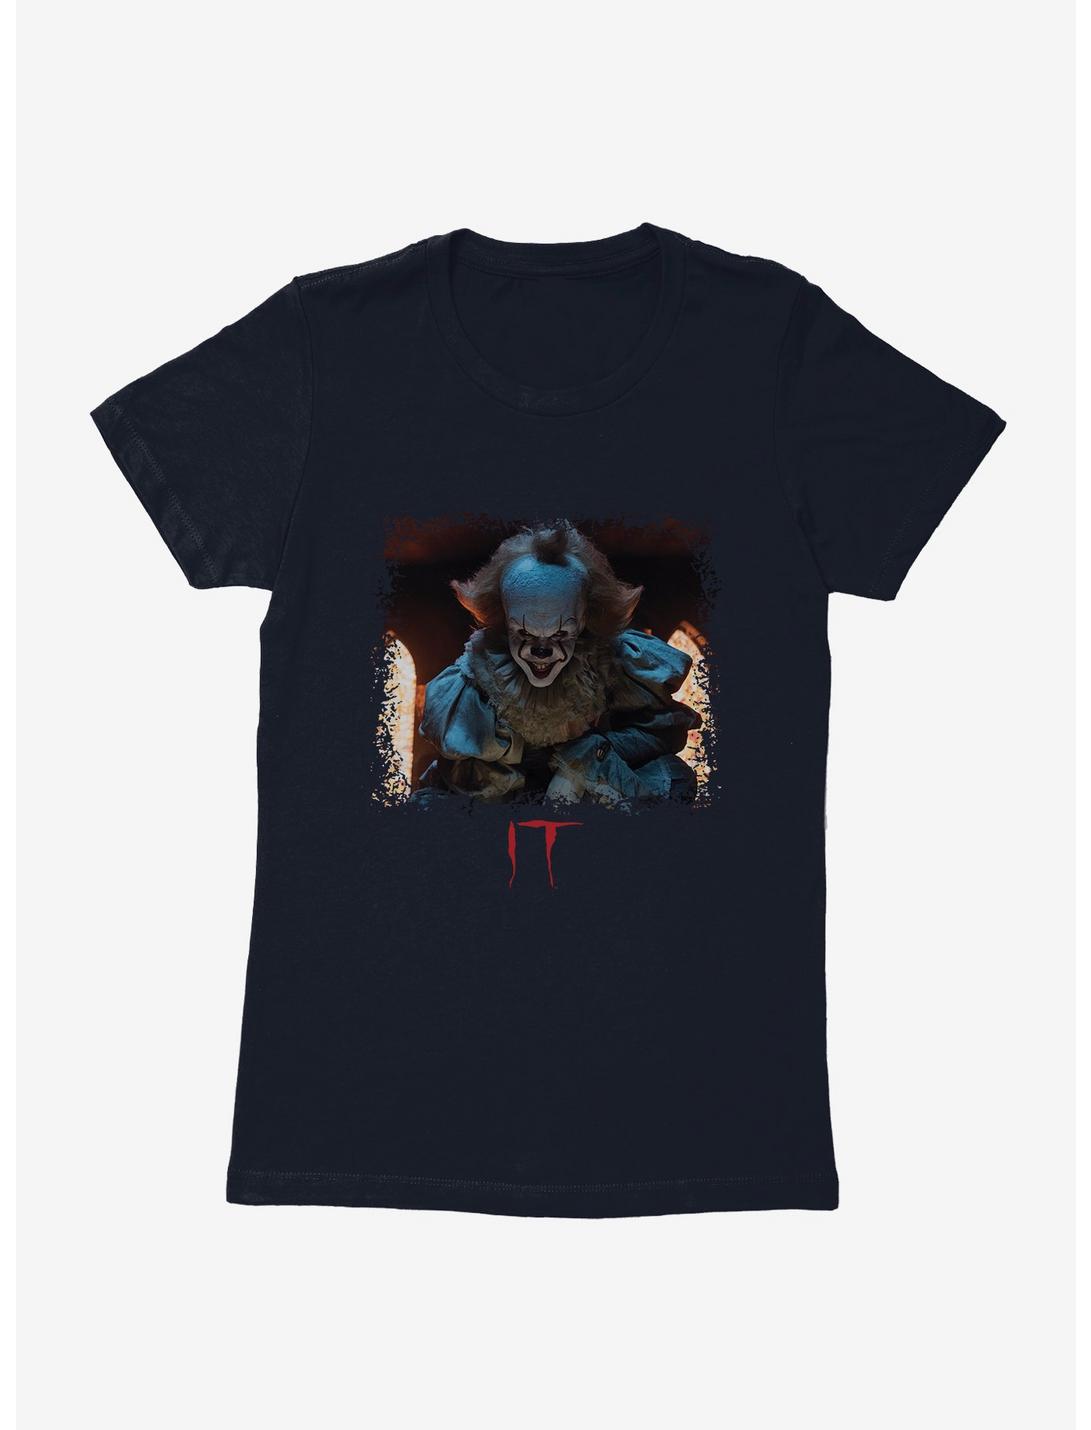 IT Pennywise Mischievous Smile Womens T-Shirt, MIDNIGHT NAVY, hi-res